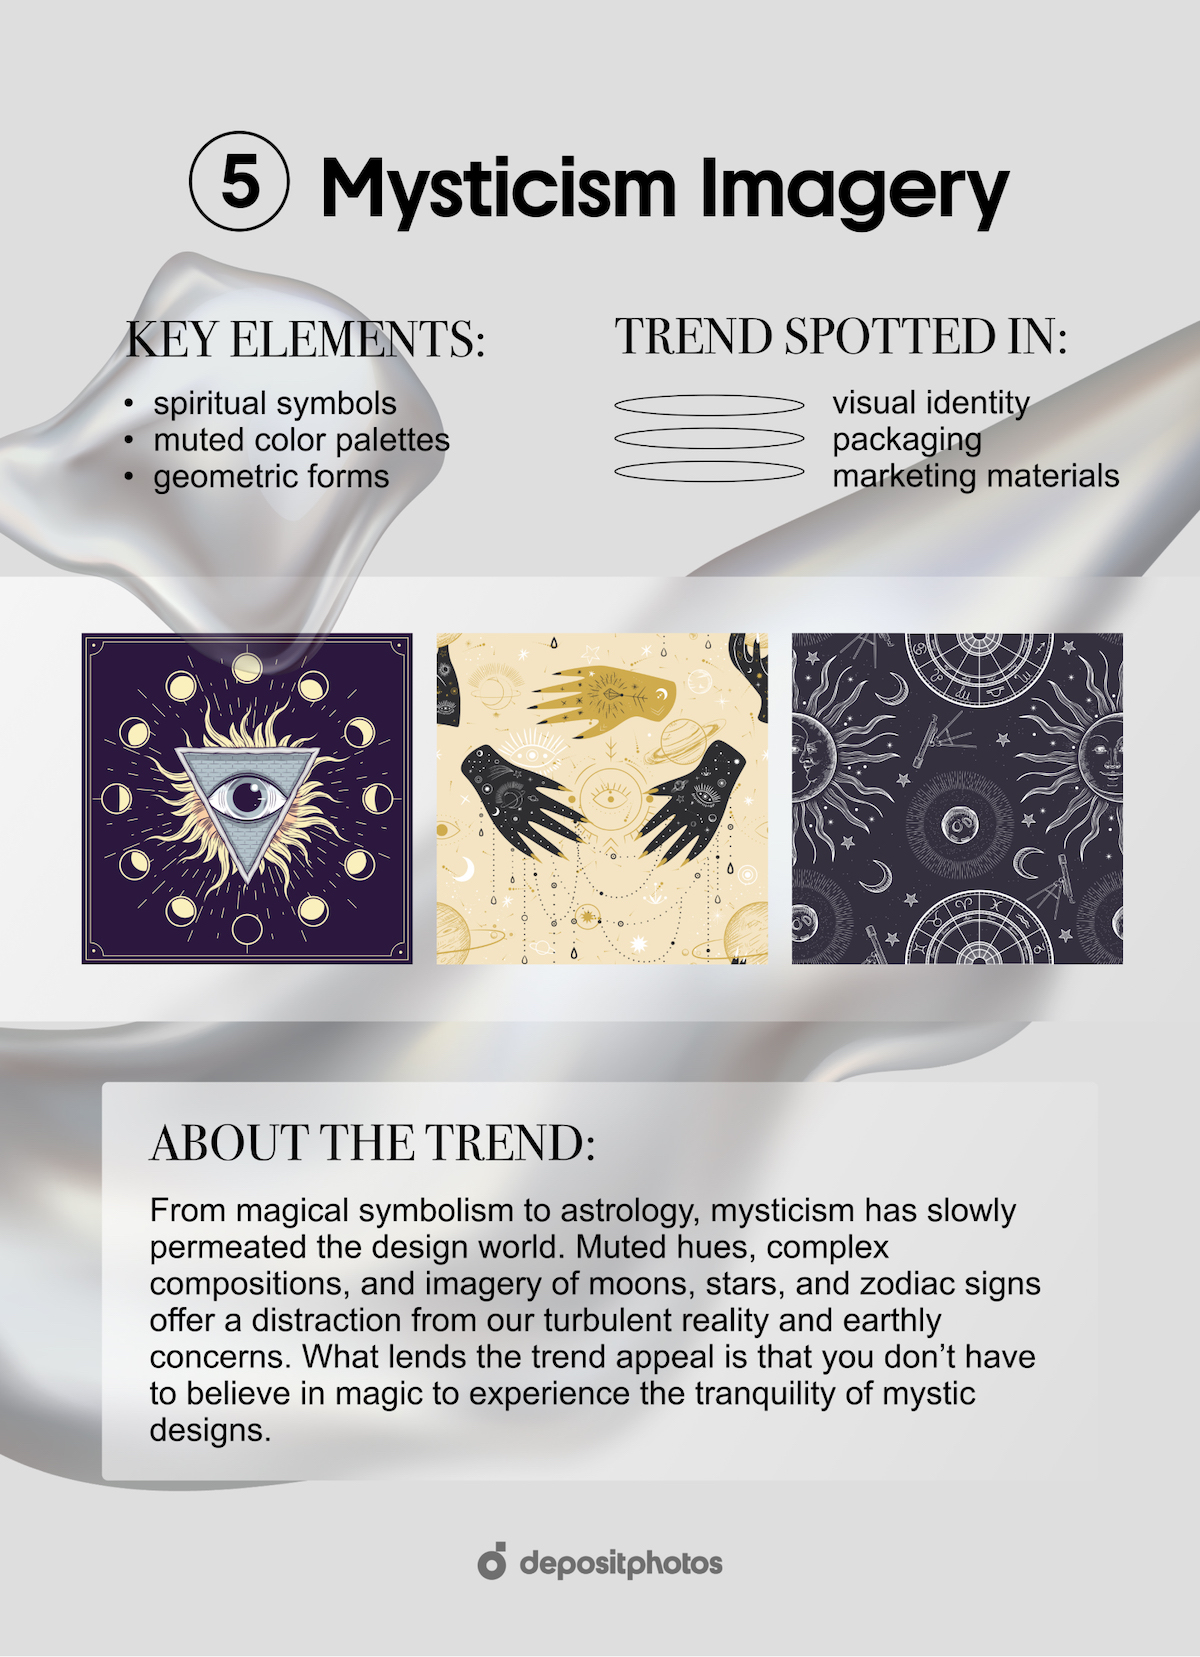 2023 Graphic Design Trends - Mysticism Imagery